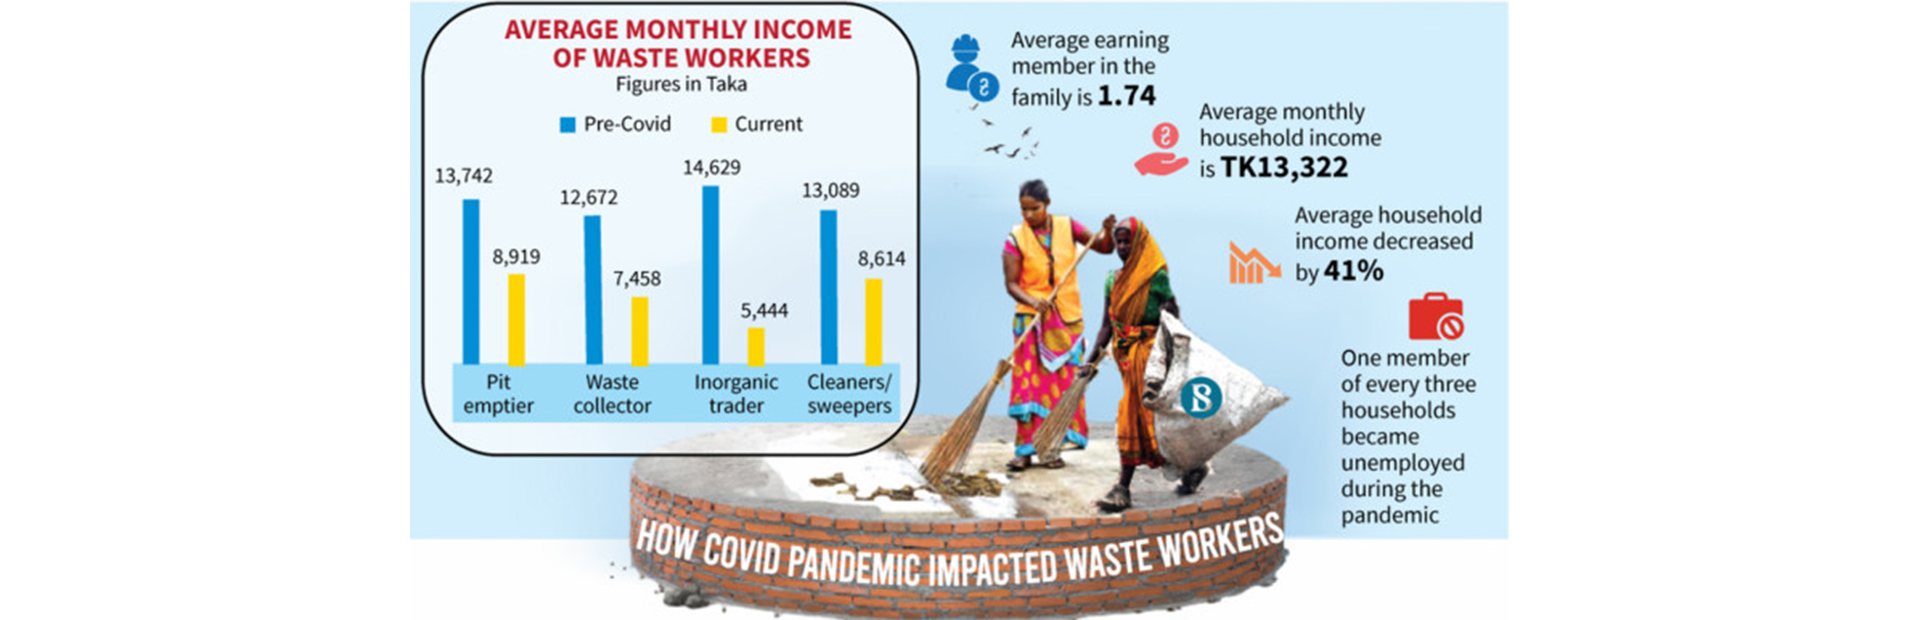 Extreme poverty increases among waste collectors during pandemic